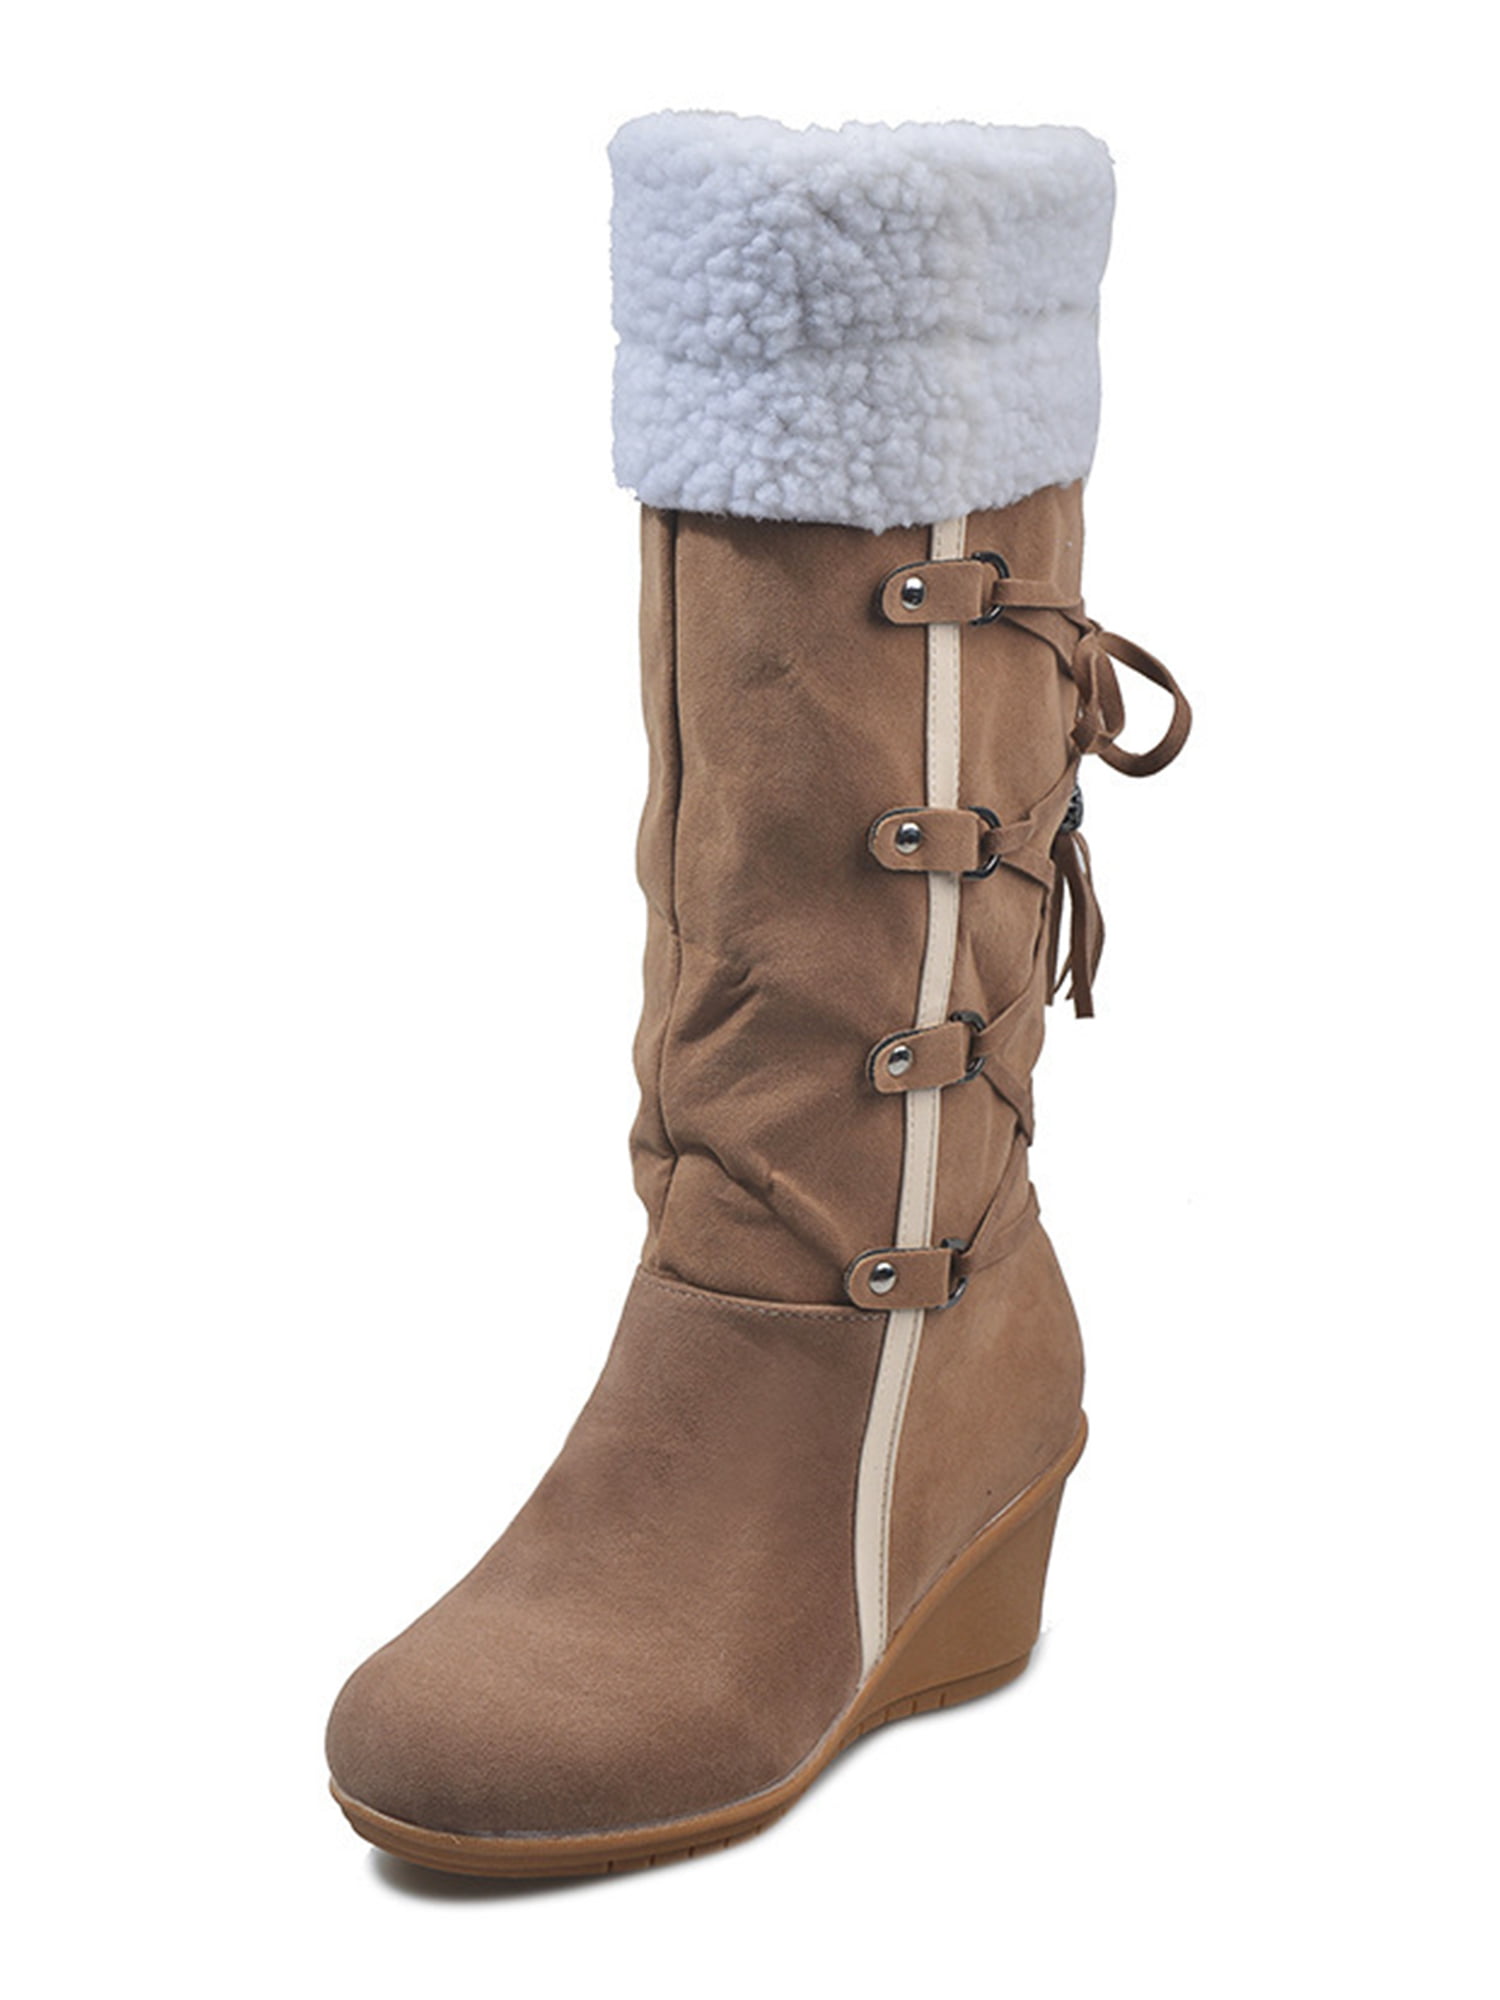 Womens faux Suede Knee High Boots Faux Suede Wedge Heel Shoes heel Ankle Boots 